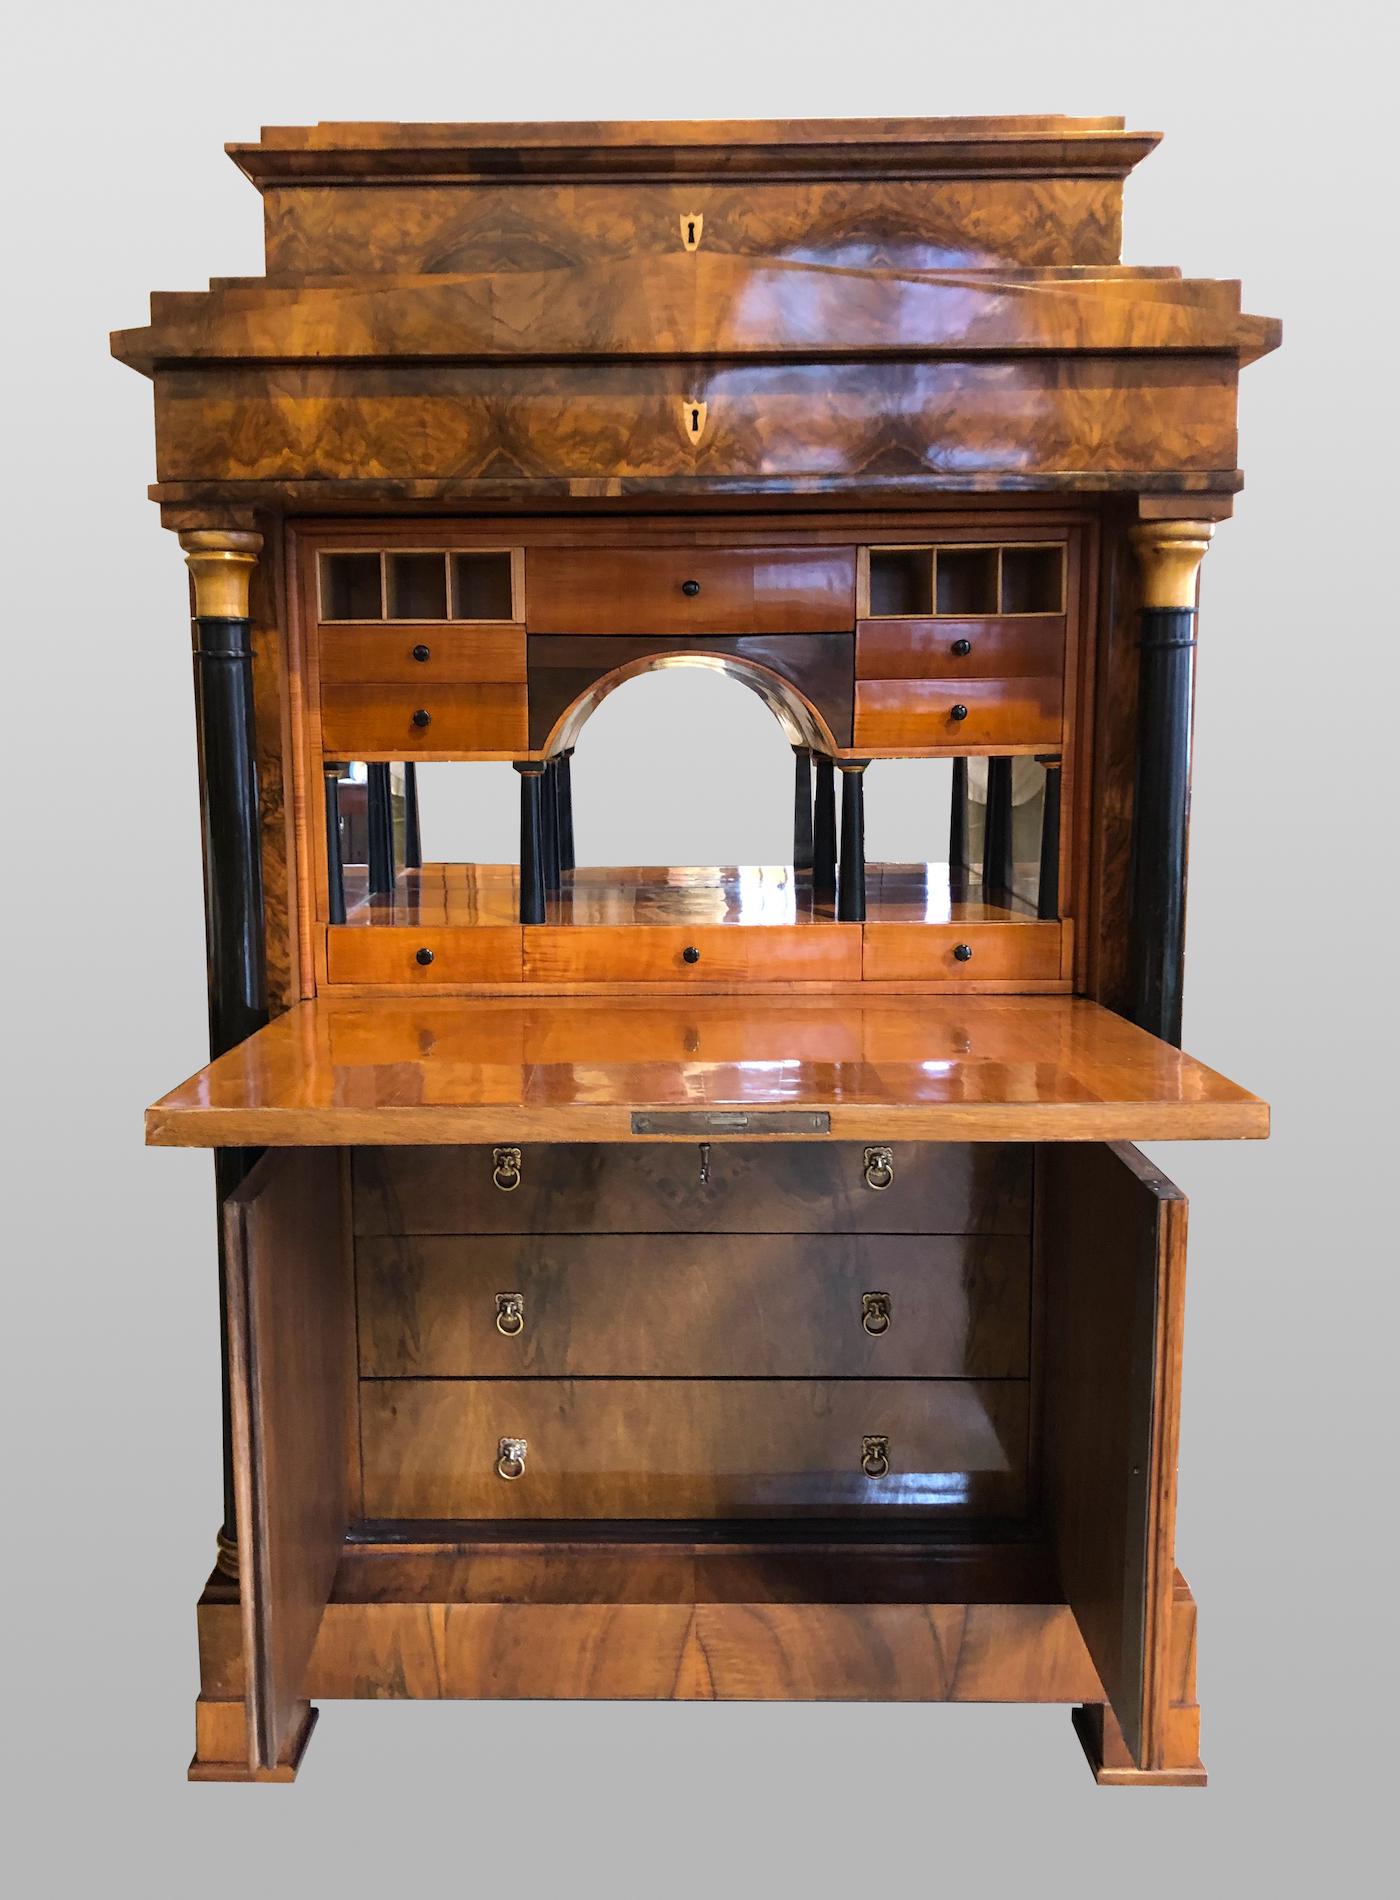 This unique Empire / Biedermeier secretary was created in Mainz around 1820 and is veneered in walnut and partly on oak. Curled maple, pear tree and maple were used in the furnishings. It comes from an estate of a villa in Mainz. But also the